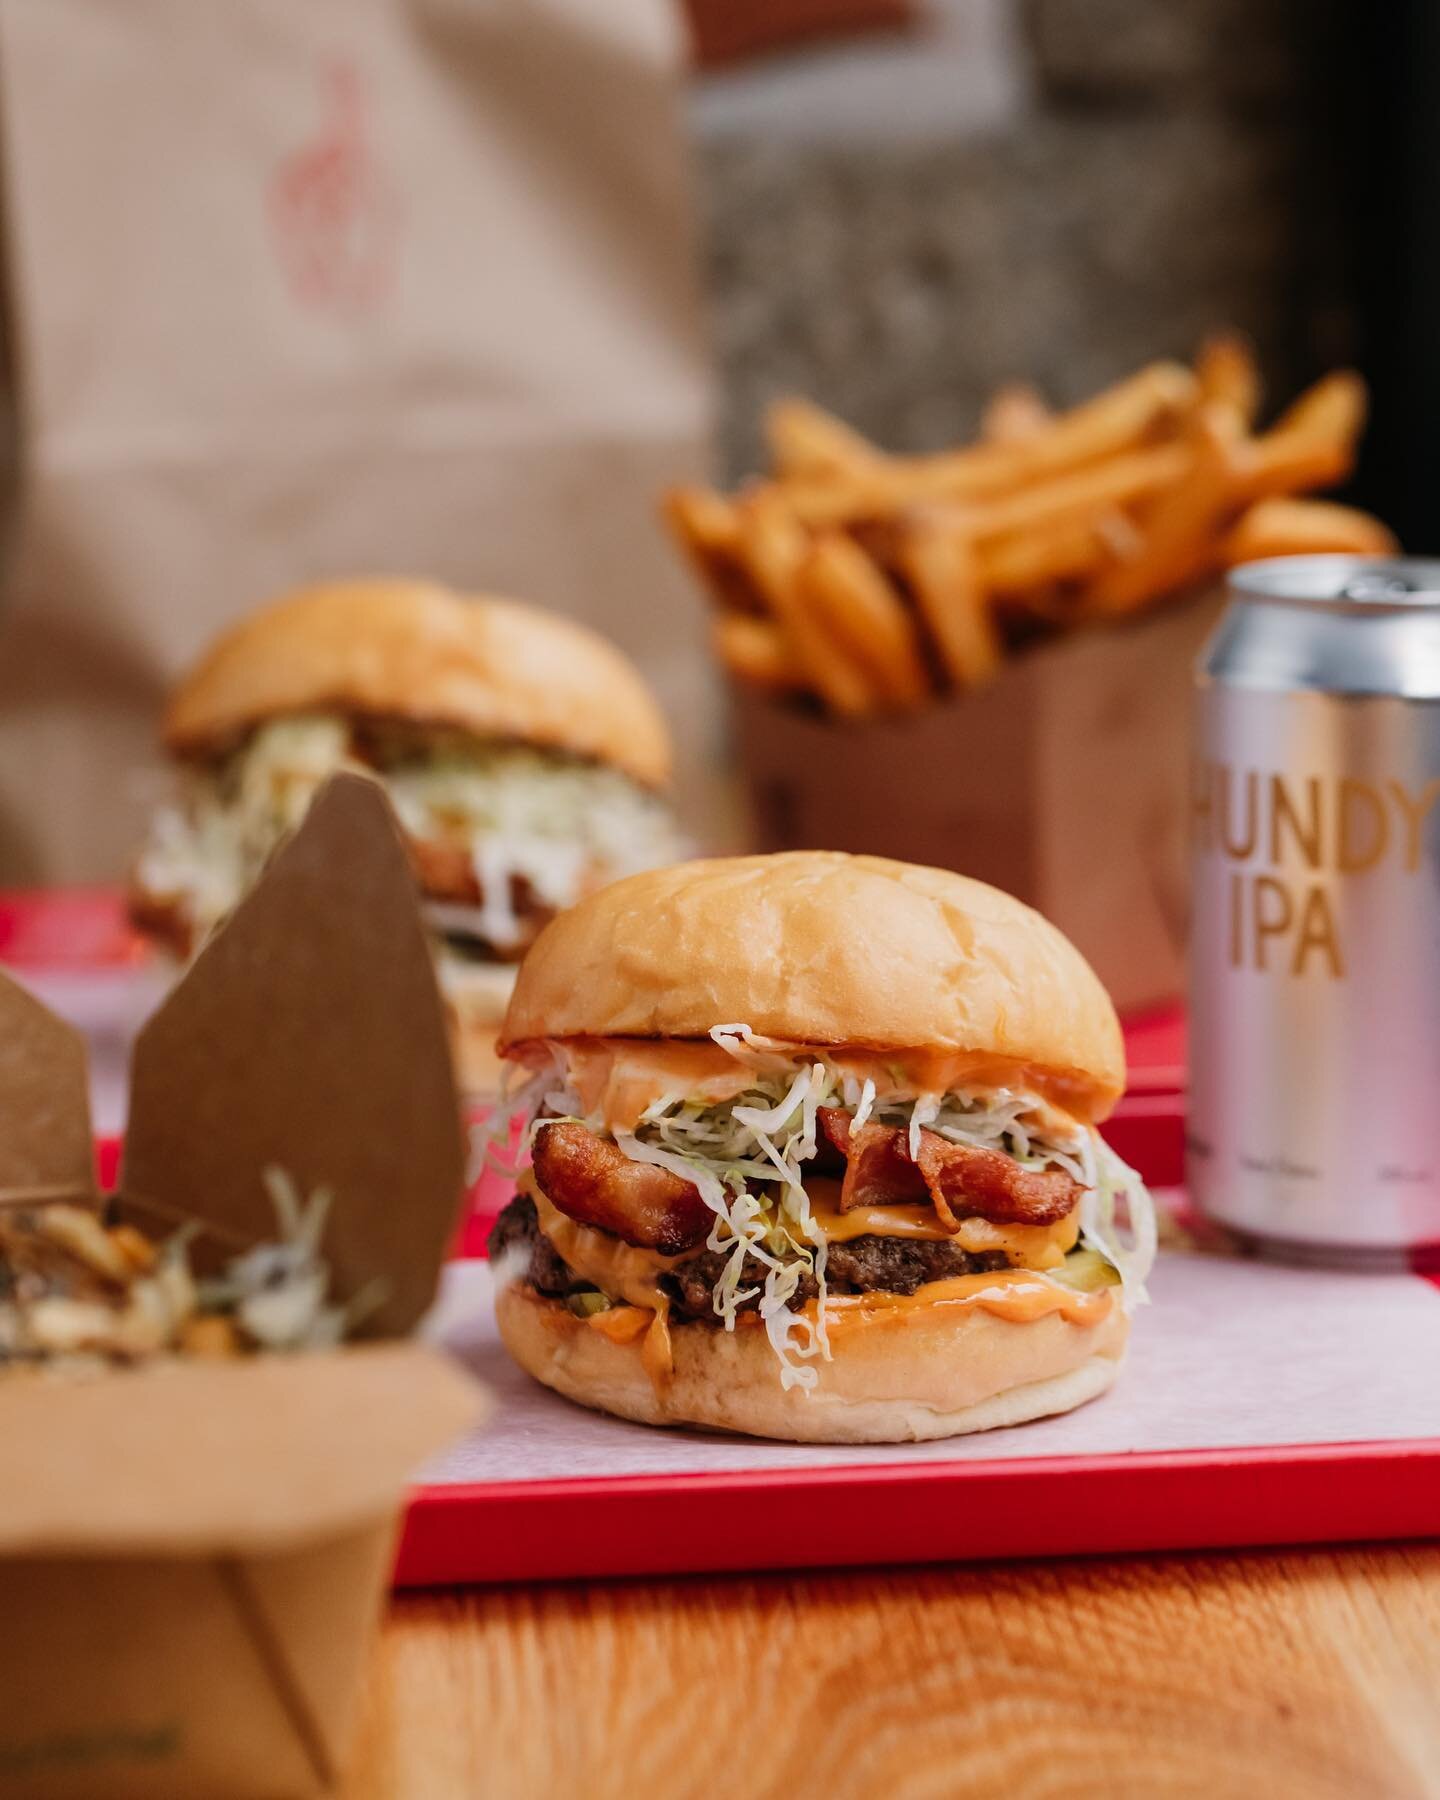 Take out available everyday on the delivery apps in Vancouver, Calgary, Edmonton, and Toronto! #hundy #hundyburger
&bull;
&bull;
&bull;
&bull;
&bull;
#artofplating #gastropost #vancity
#cheflife #westcoast #beautifulbc #vancouverfood #staffcanteen #f